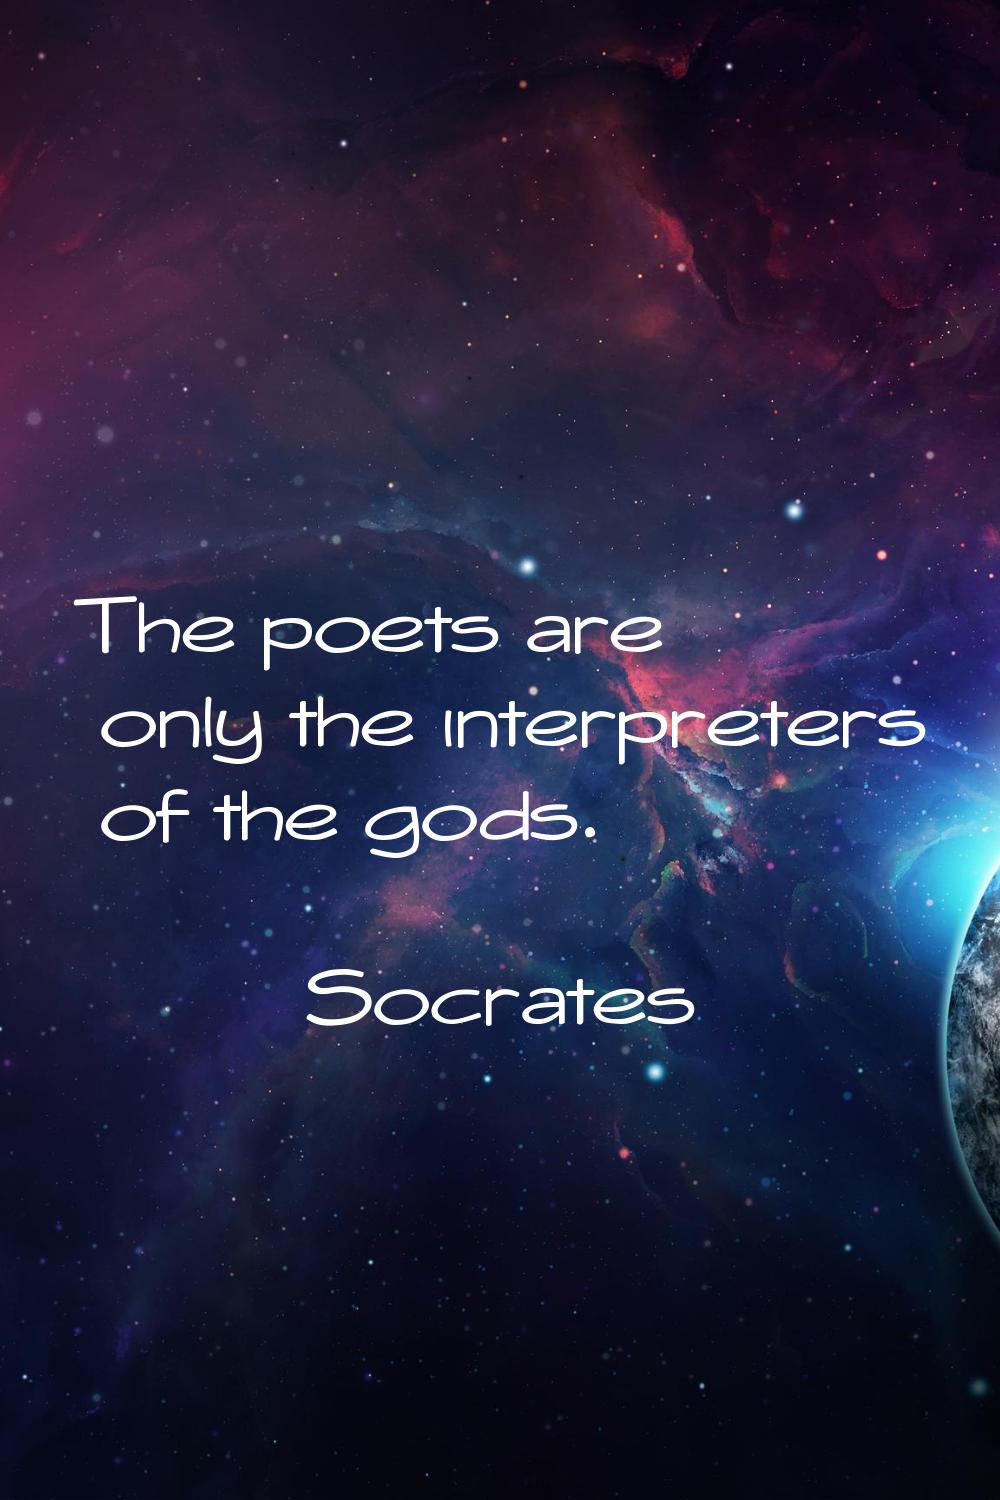 The poets are only the interpreters of the gods.